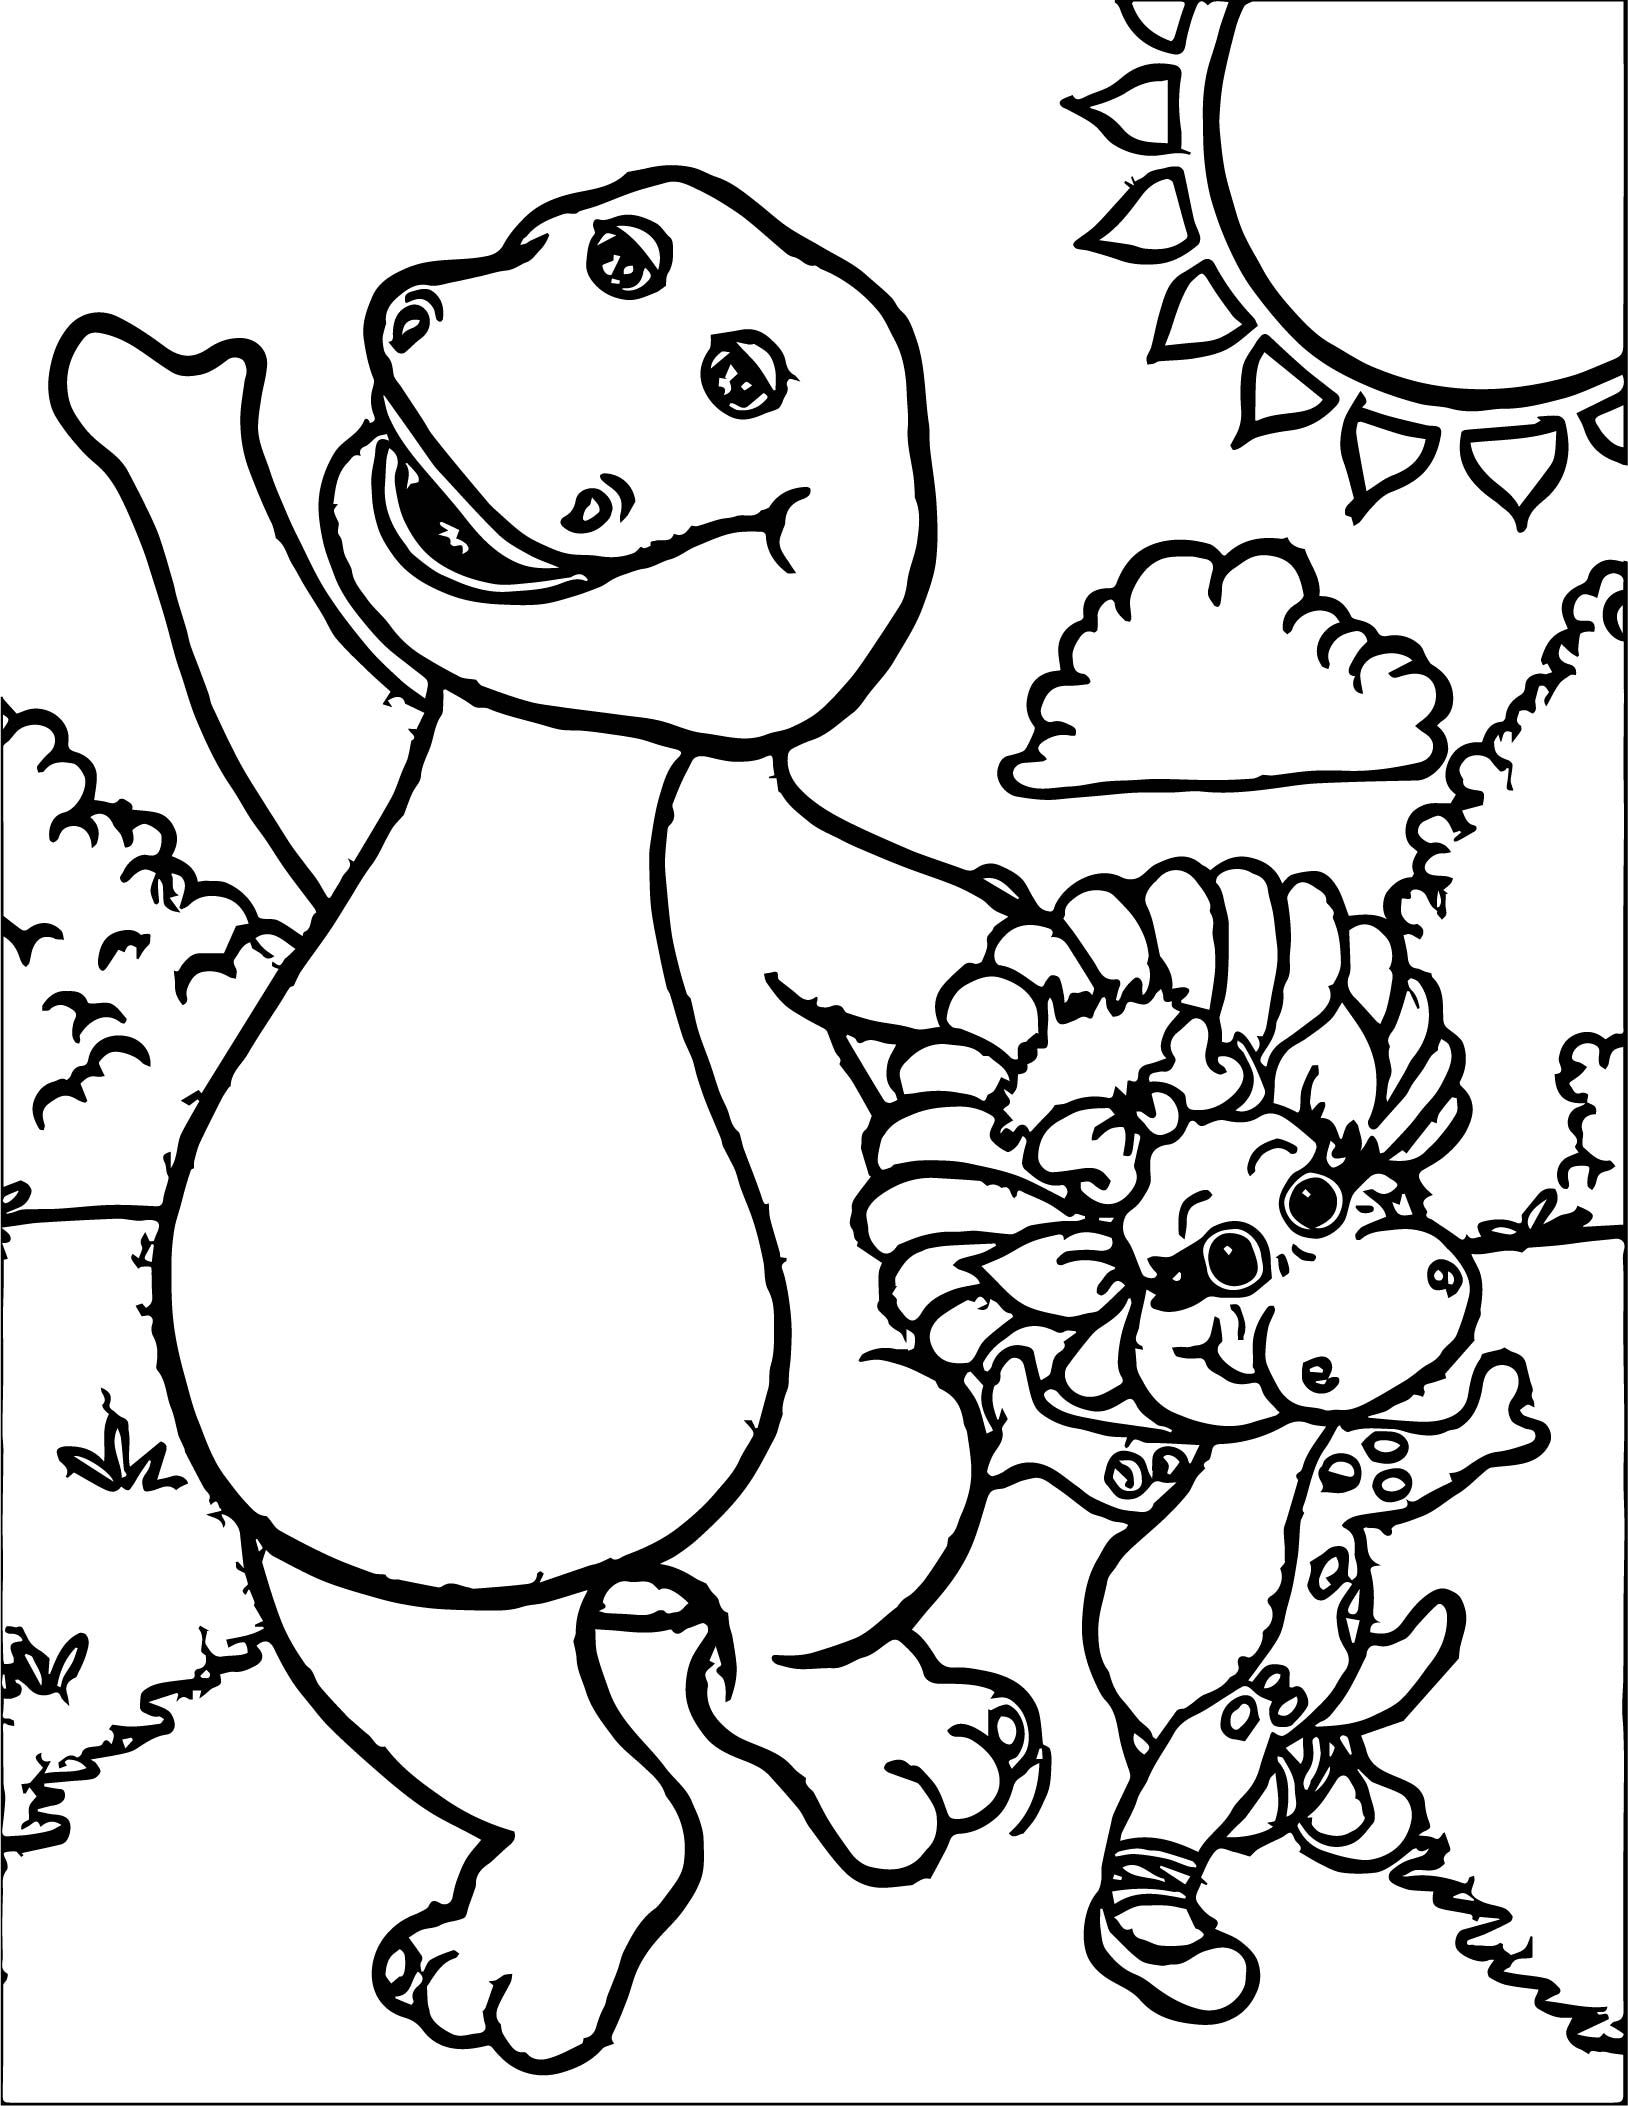 awesome Barney And Baby Bop Have Fun Together Coloring Page (With ...